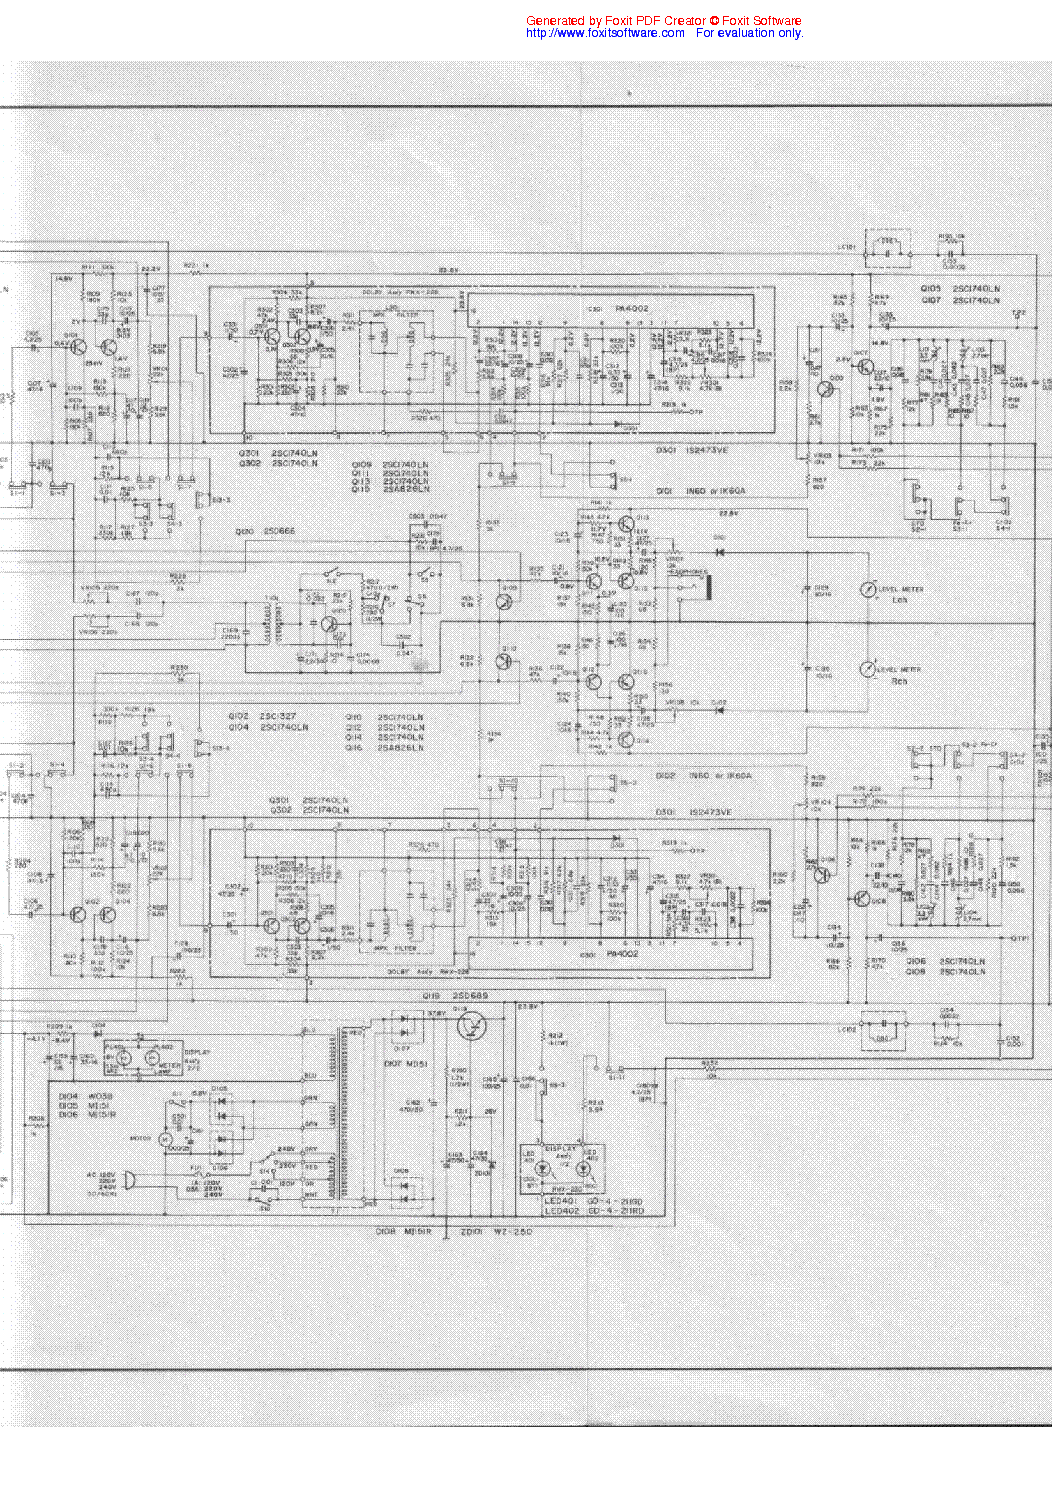 PIONEER CT-F500 SCH 1 service manual (2nd page)